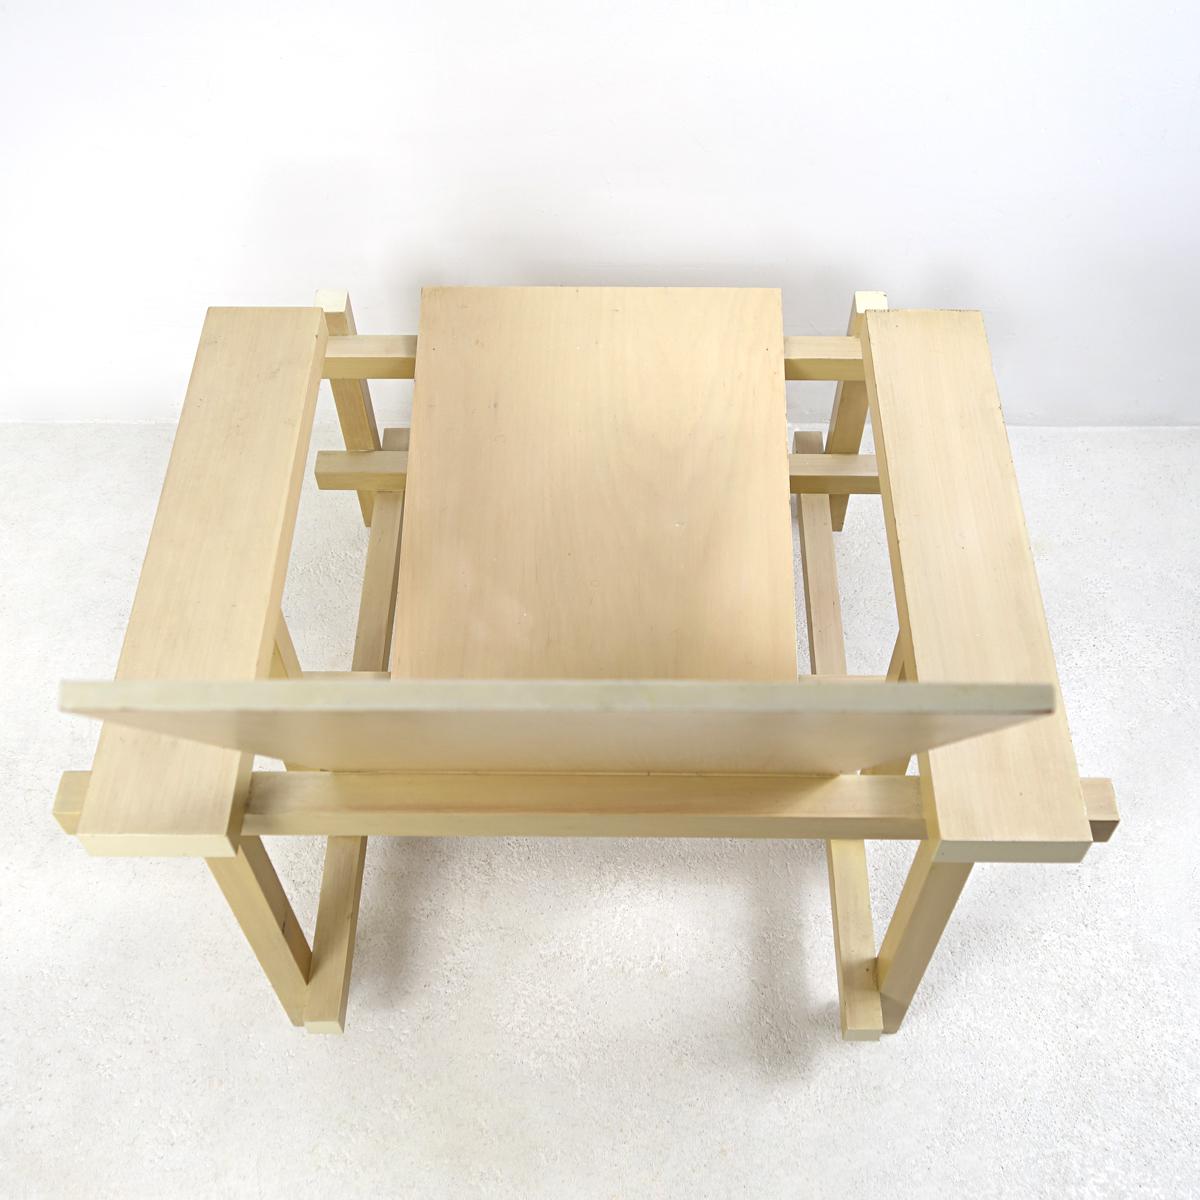 Modernist Chair Made of Uncolored Lacquered Wood after Gerrit Rietveld's Design 8